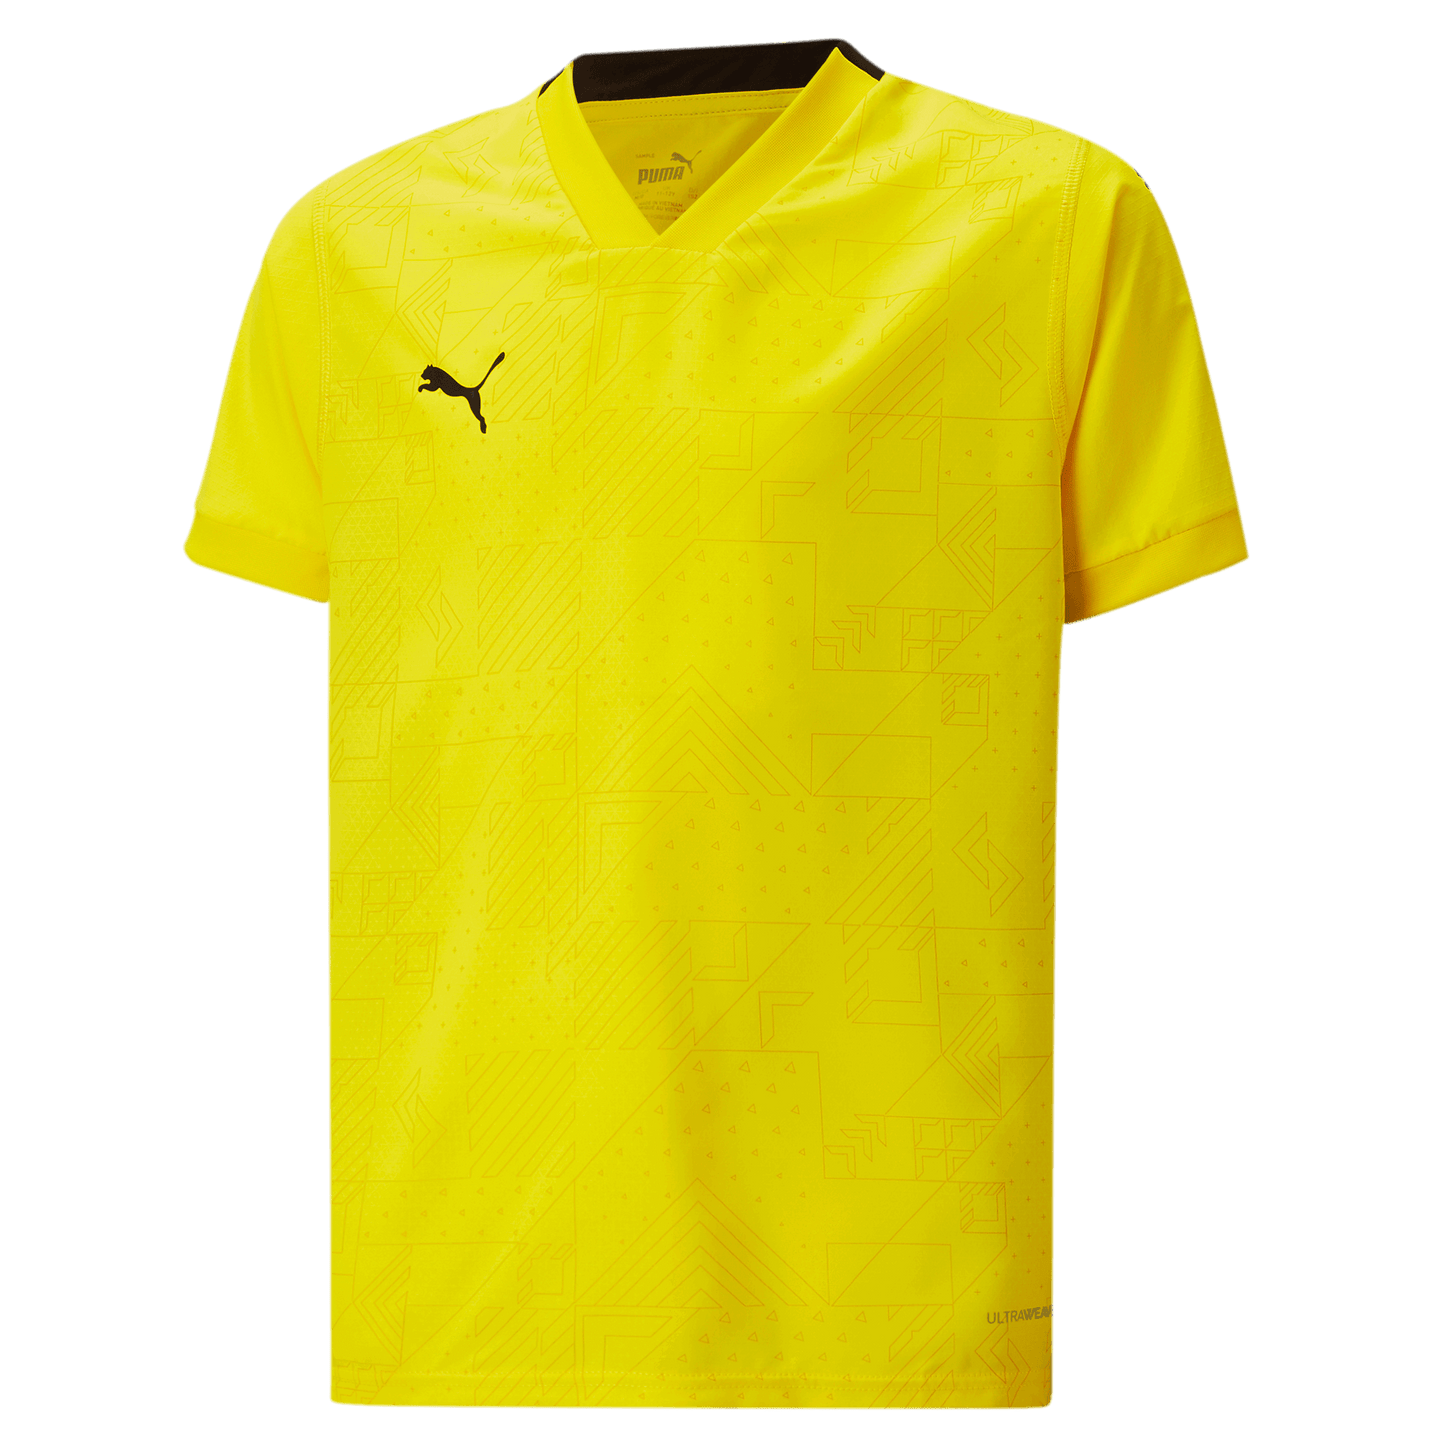 Puma YOUTH Team Cup Jersey